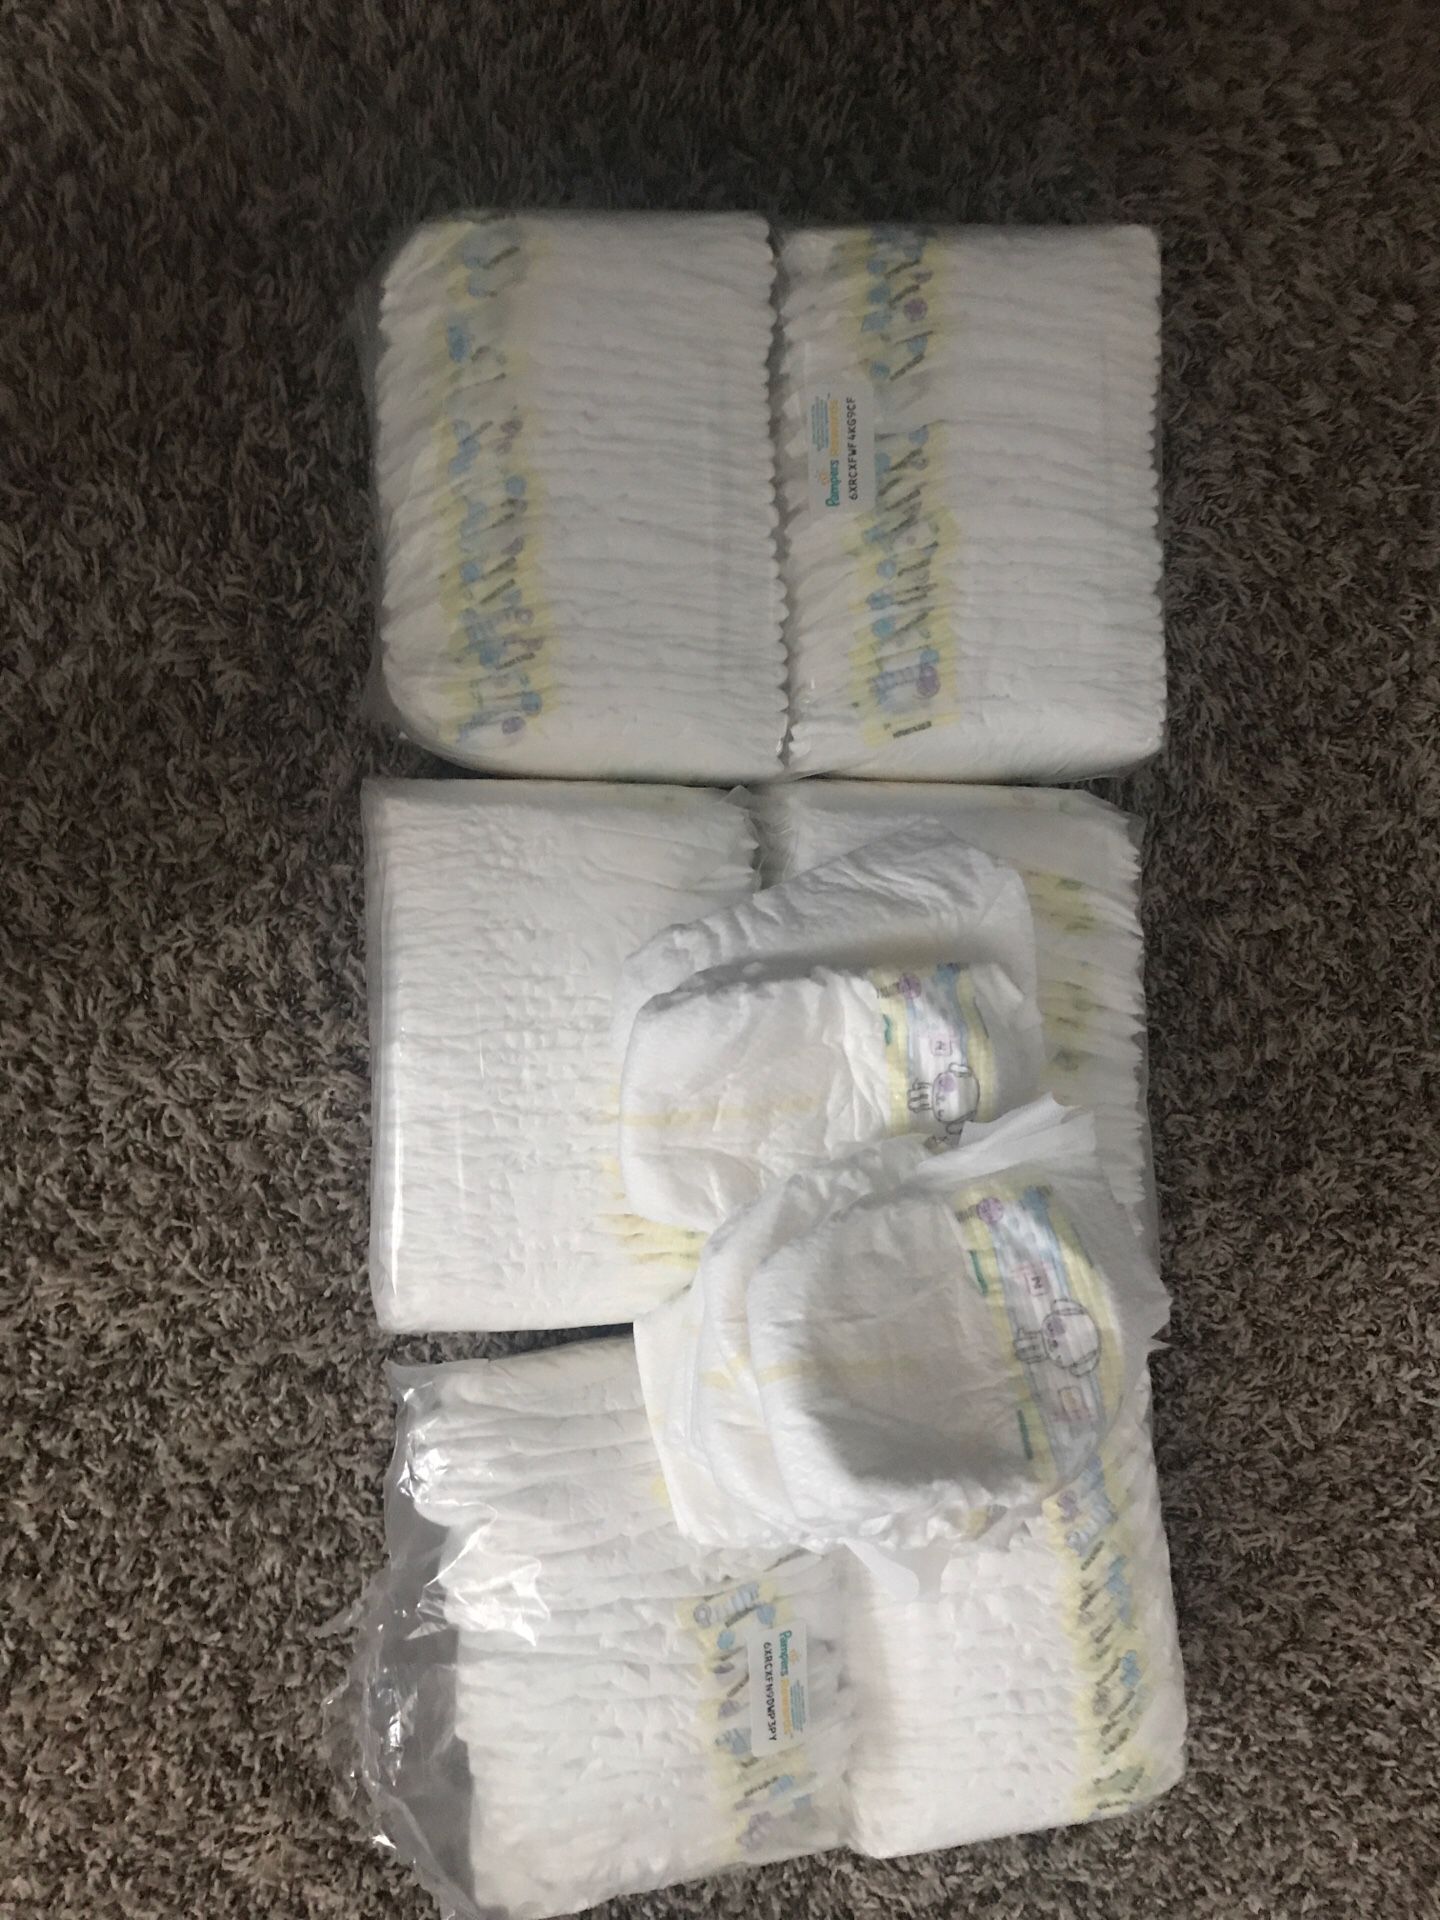 Pampers and Luvs diapers